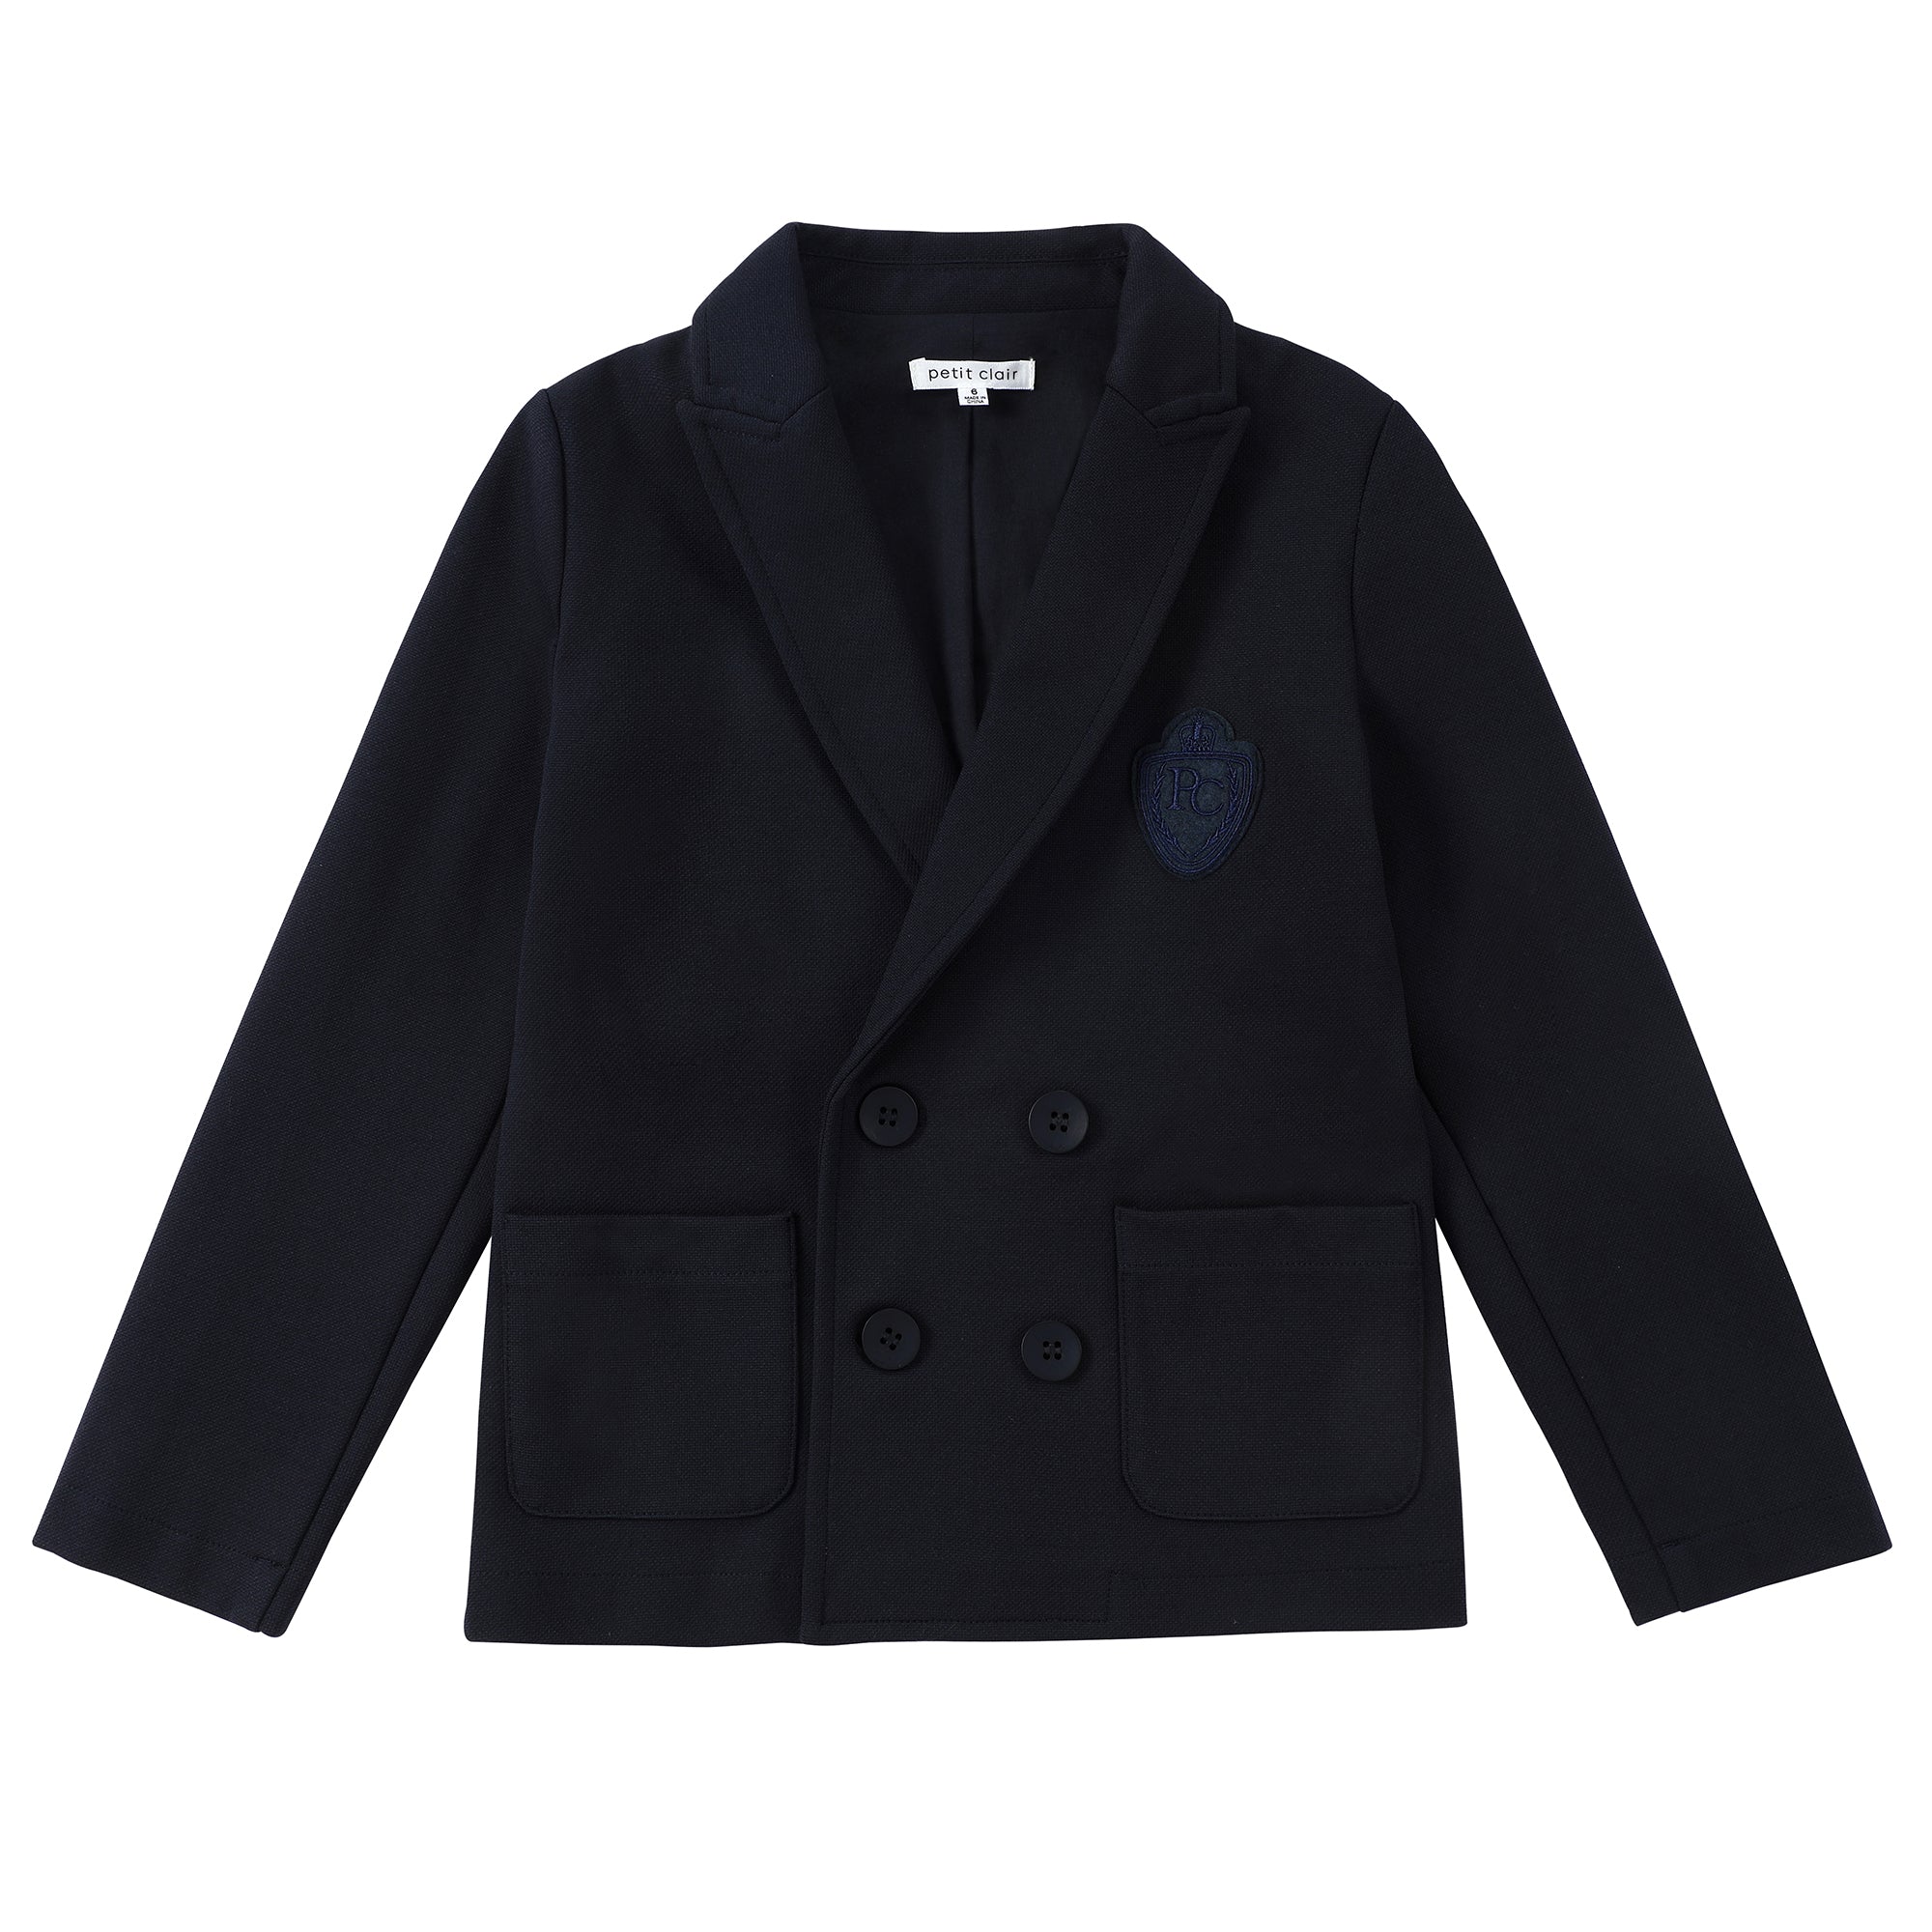 Navy Stretch Pique Double Breasted Blazer With Emblem